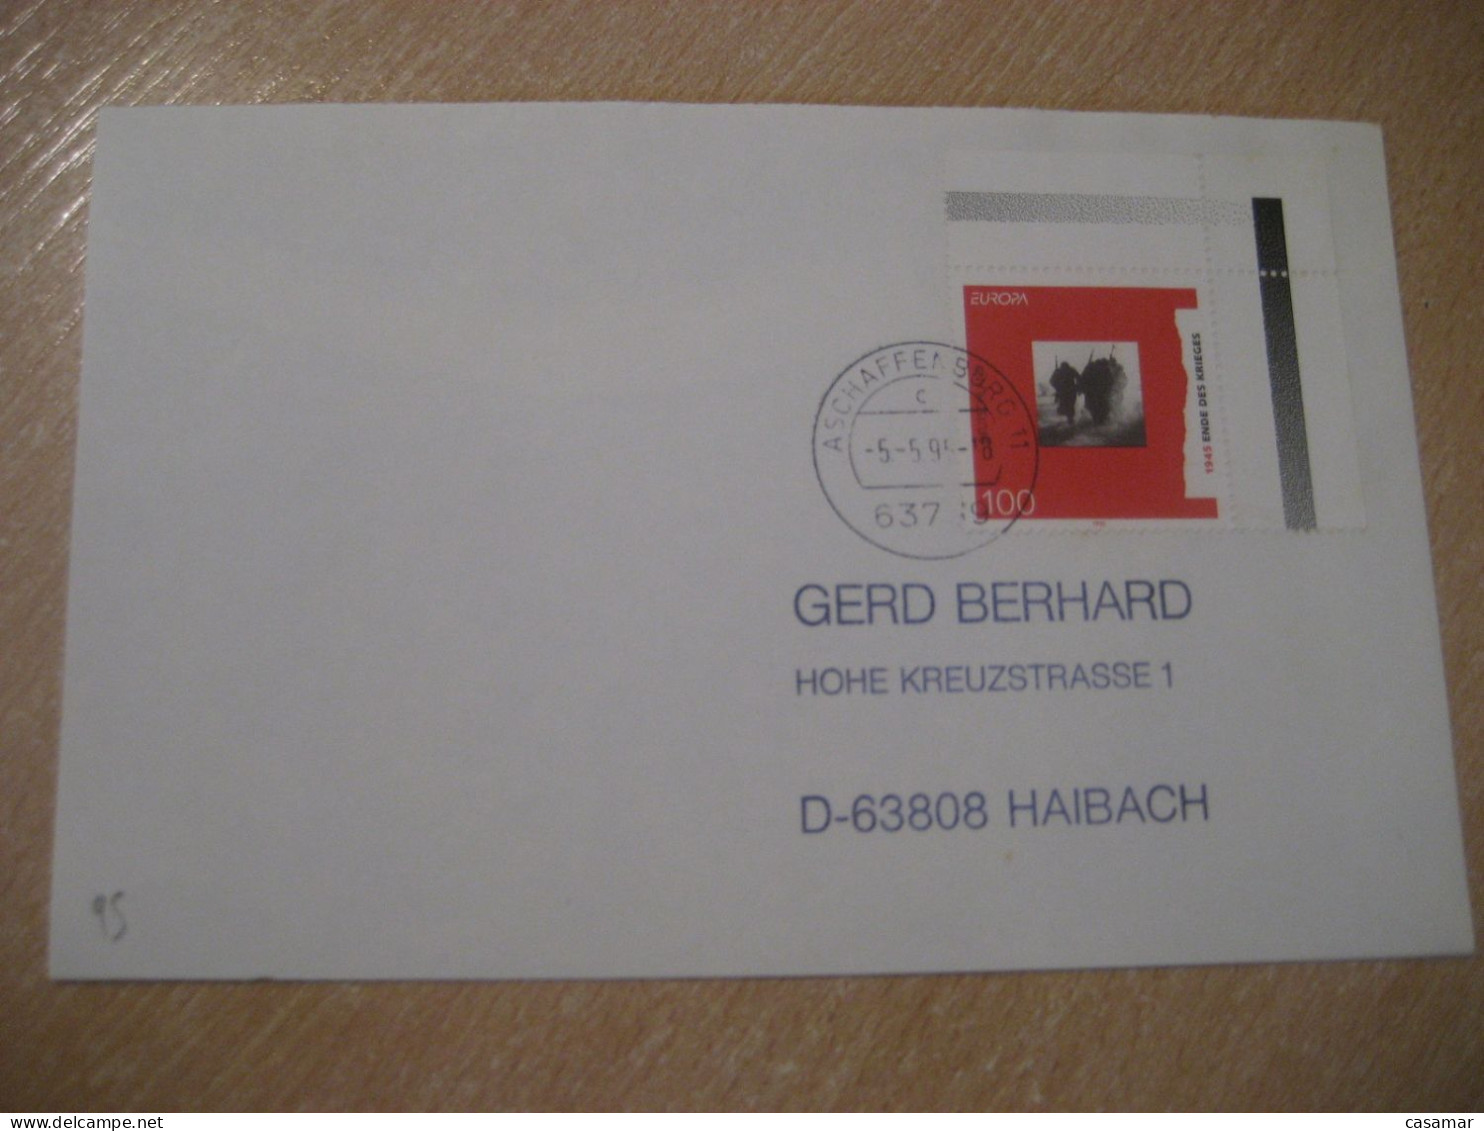 ASCHAFFENBURG 1995 To Haibach WW2 WWII End Of The War Stamp Europa Cancel Cover GERMANY - Covers & Documents